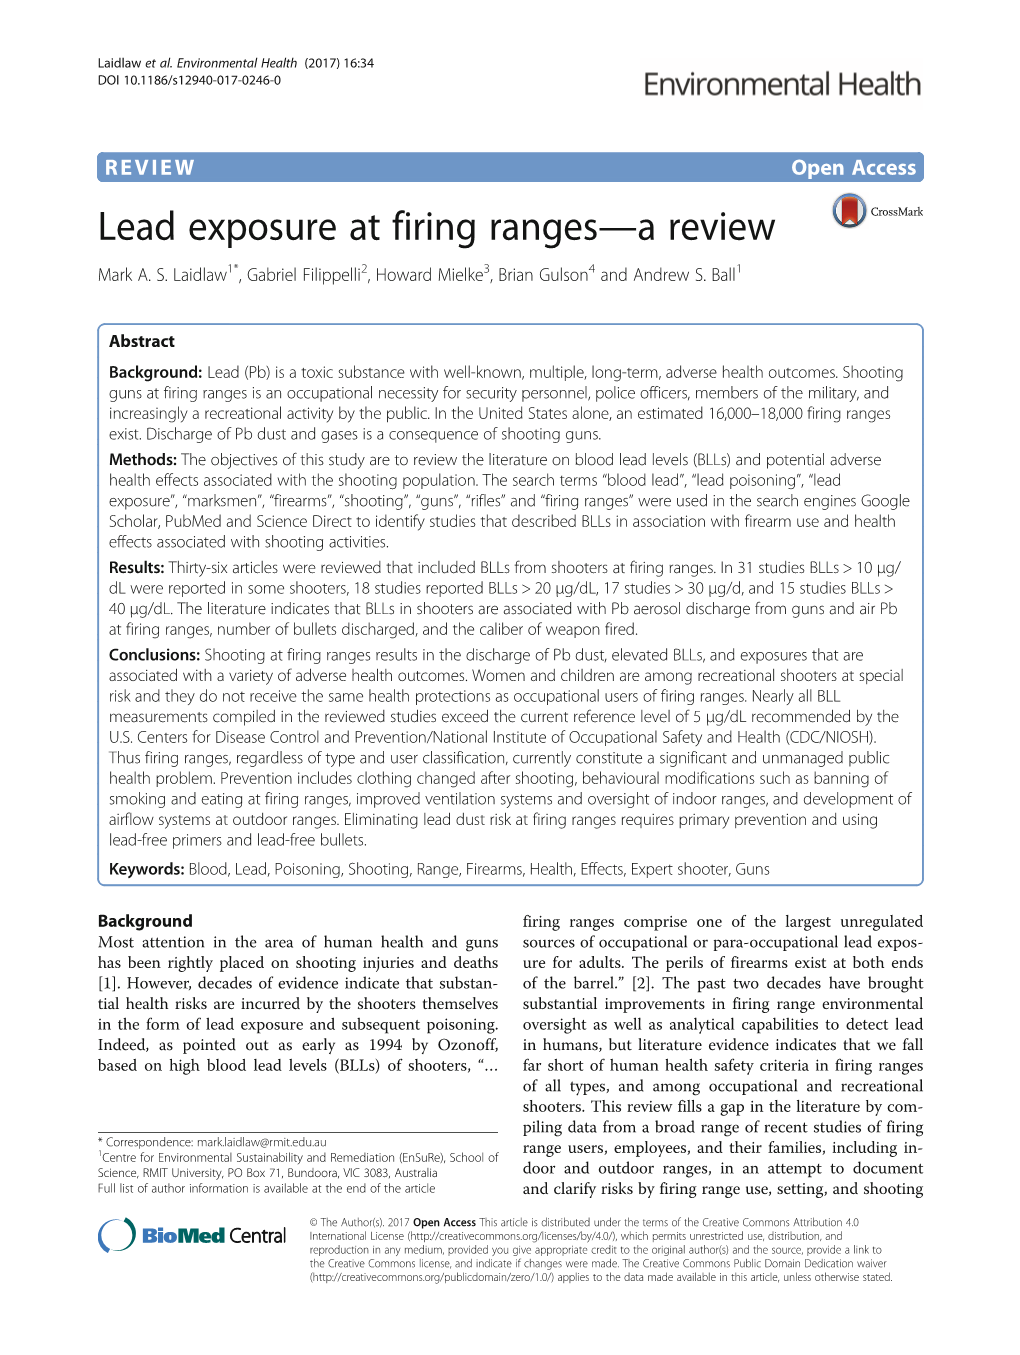 Lead Exposure at Firing Ranges—A Review Mark A